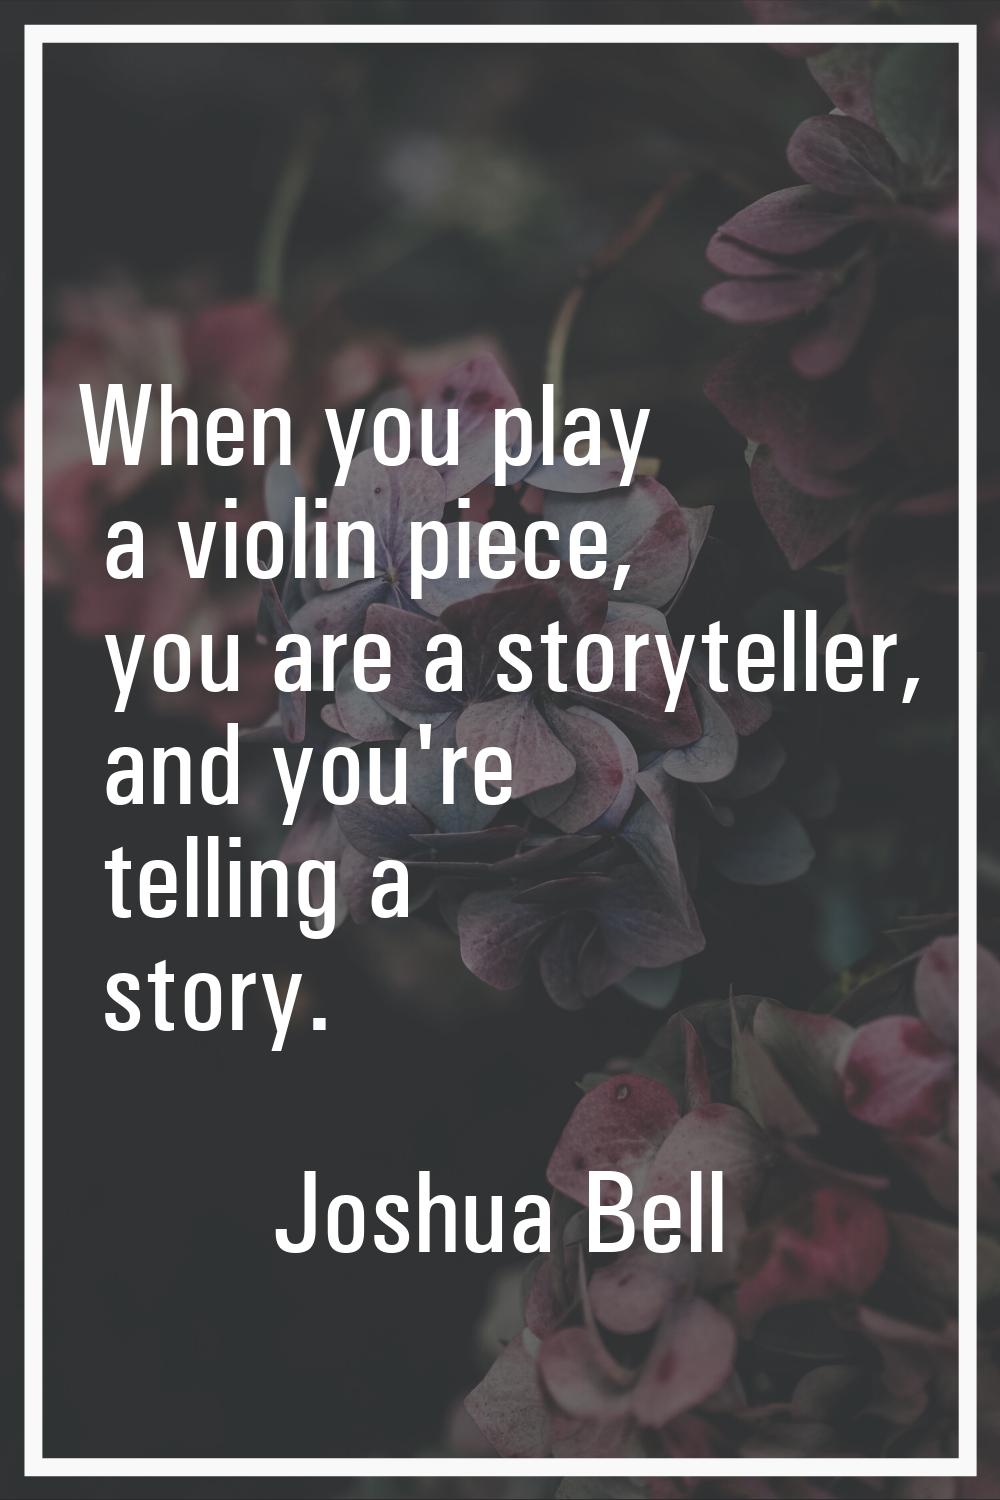 When you play a violin piece, you are a storyteller, and you're telling a story.